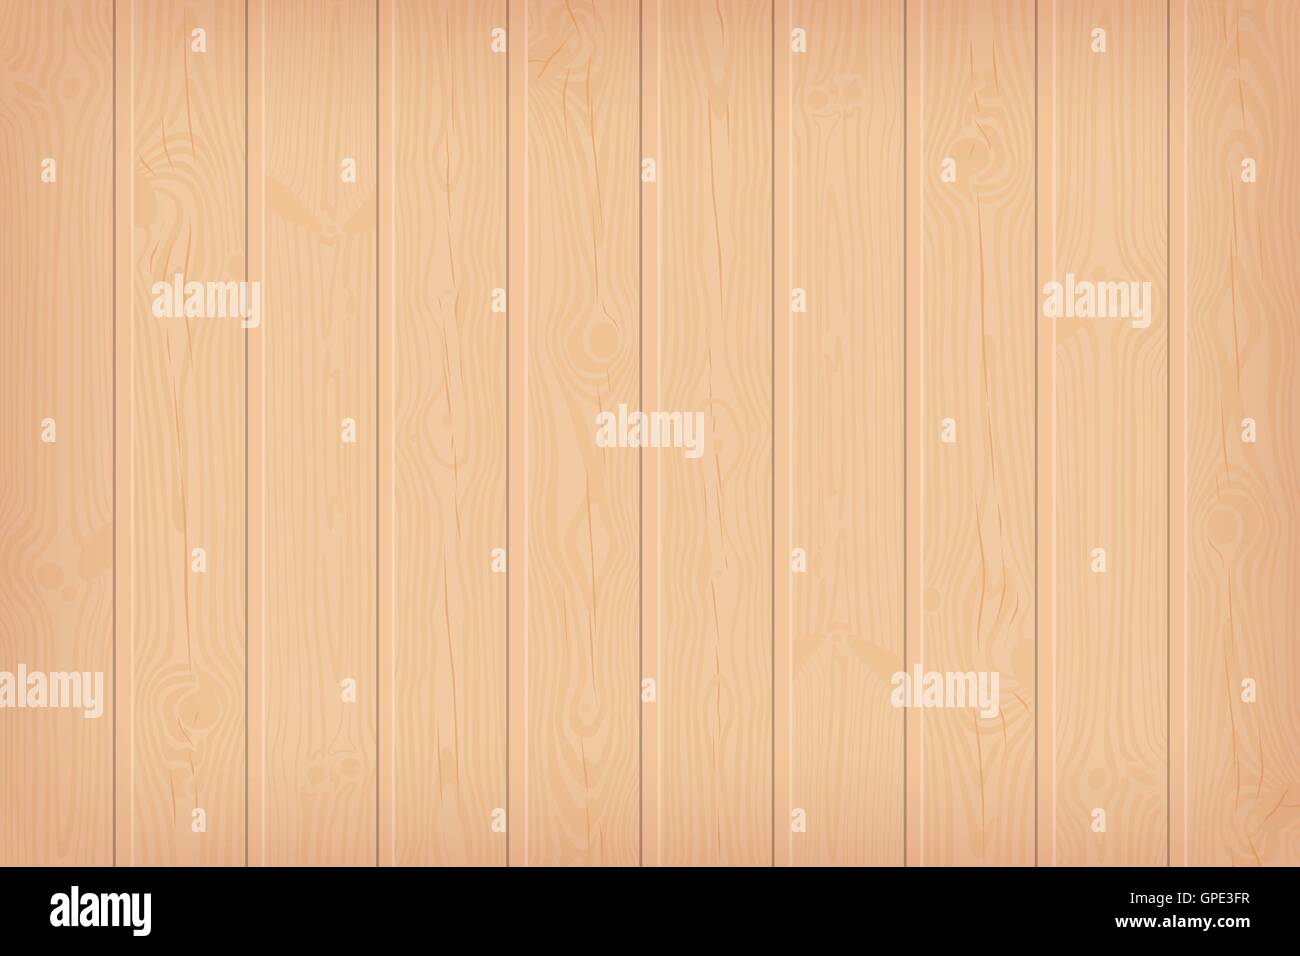 Natural textured wooden wall with knots and cracks vector background Stock Vector